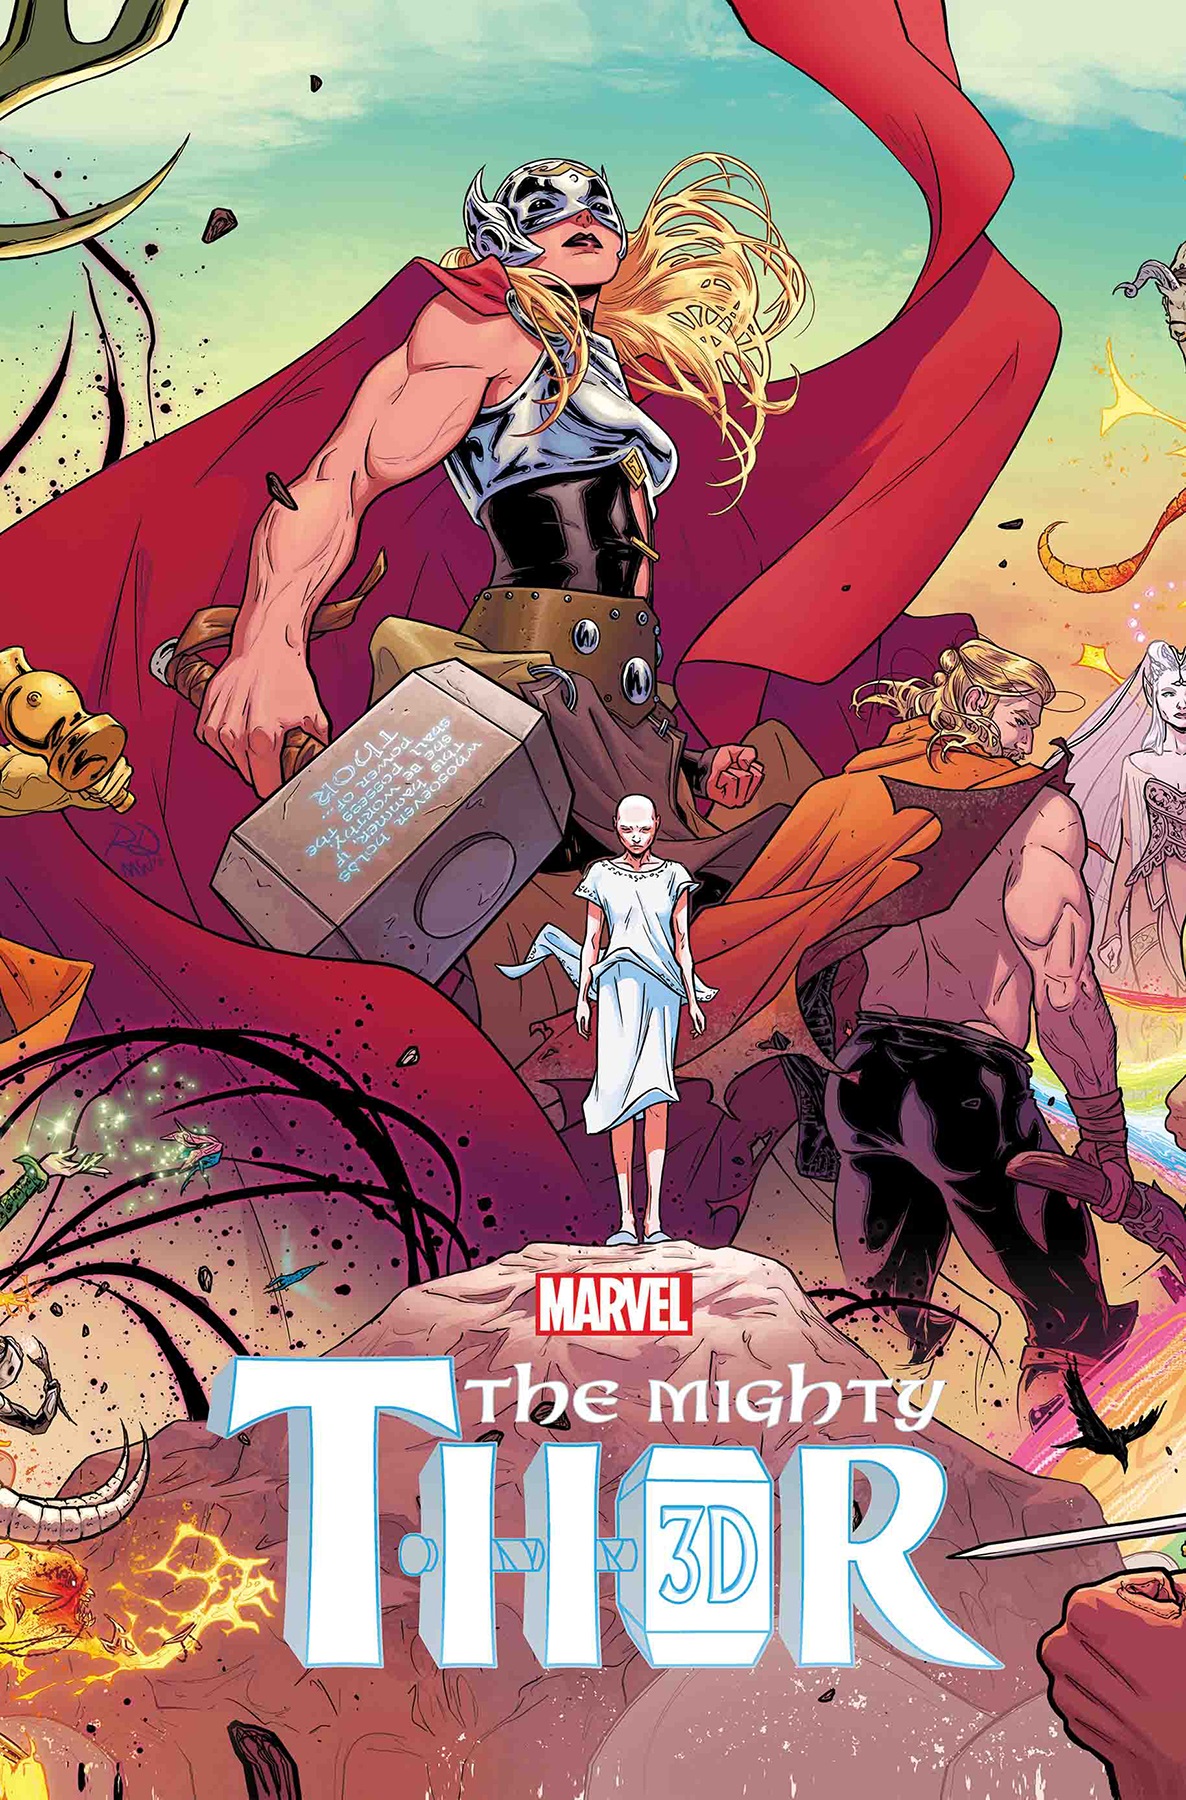 Mighty Thor 3D (2019) #1